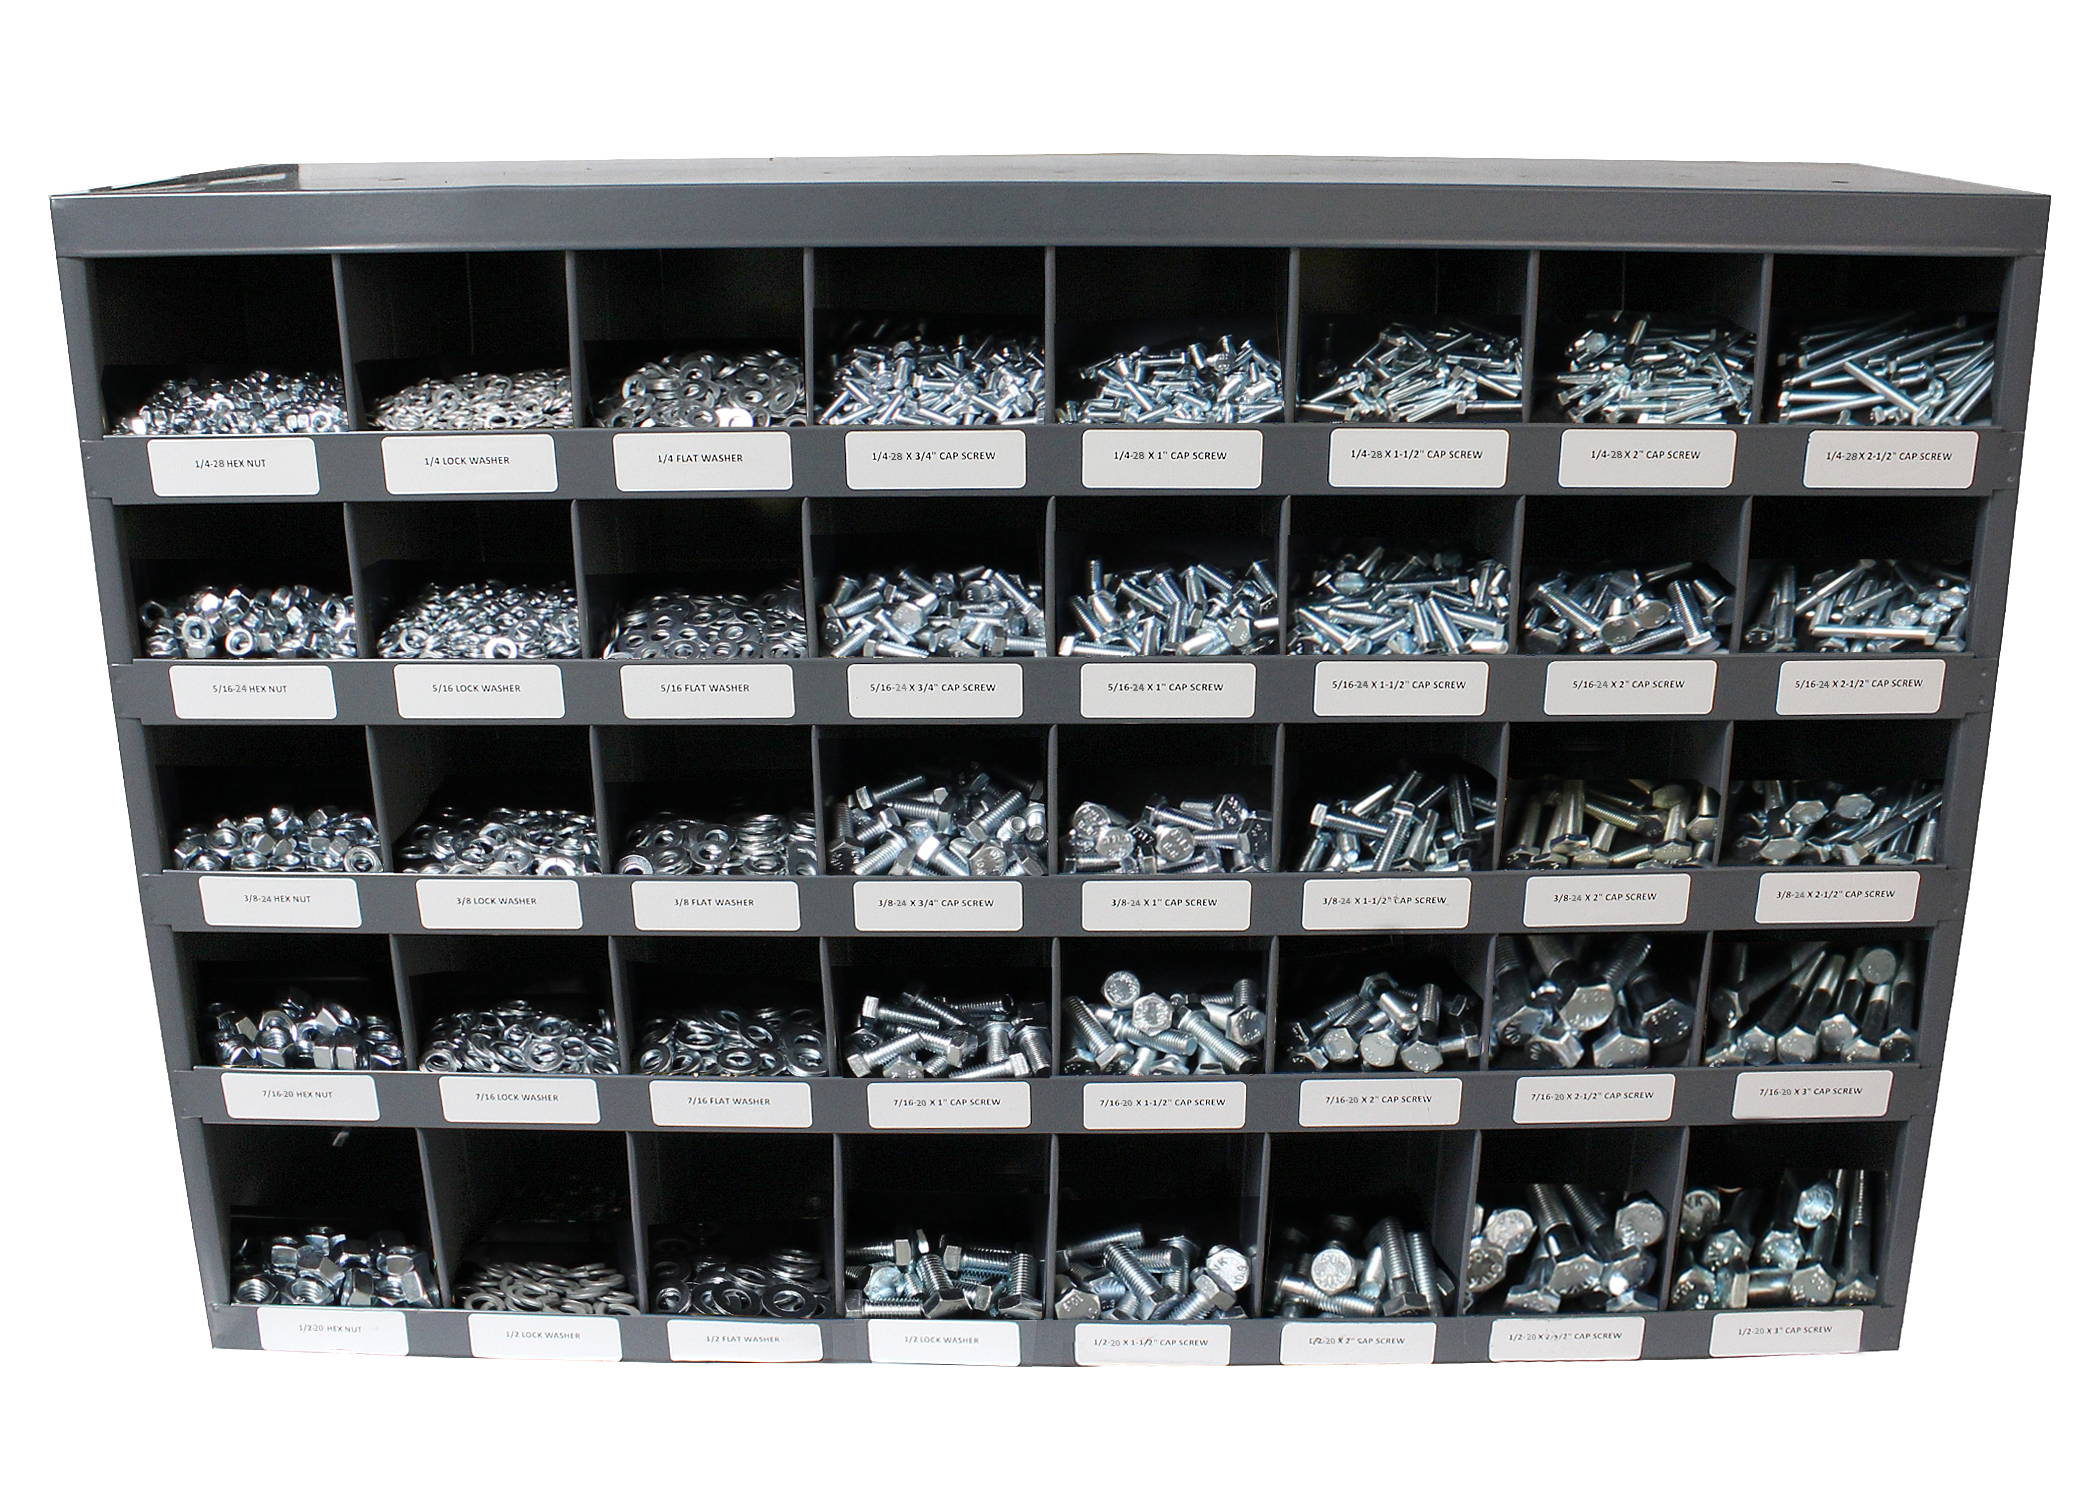 2510 Piece Stainless Steel Bolt Nut and Washer Assortment Hex Head Cap Screws Flat and Lock Washers Hex Nuts with 40 Hole Bin 